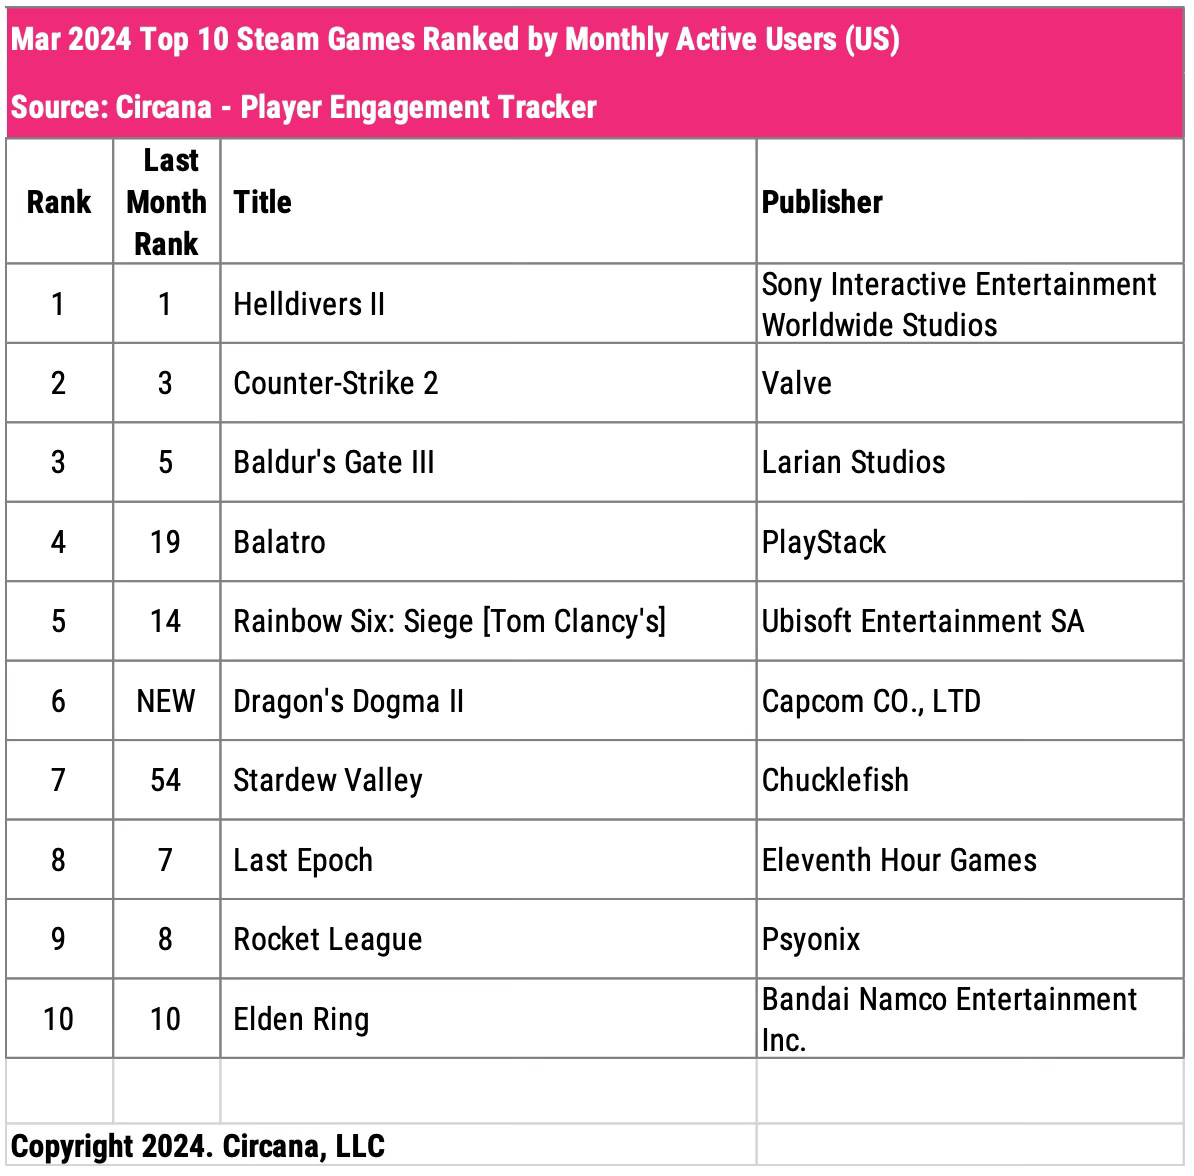 Chart showing the top 10 games played on Steam in March 2024 when ranked by monthly active users in the U.S.